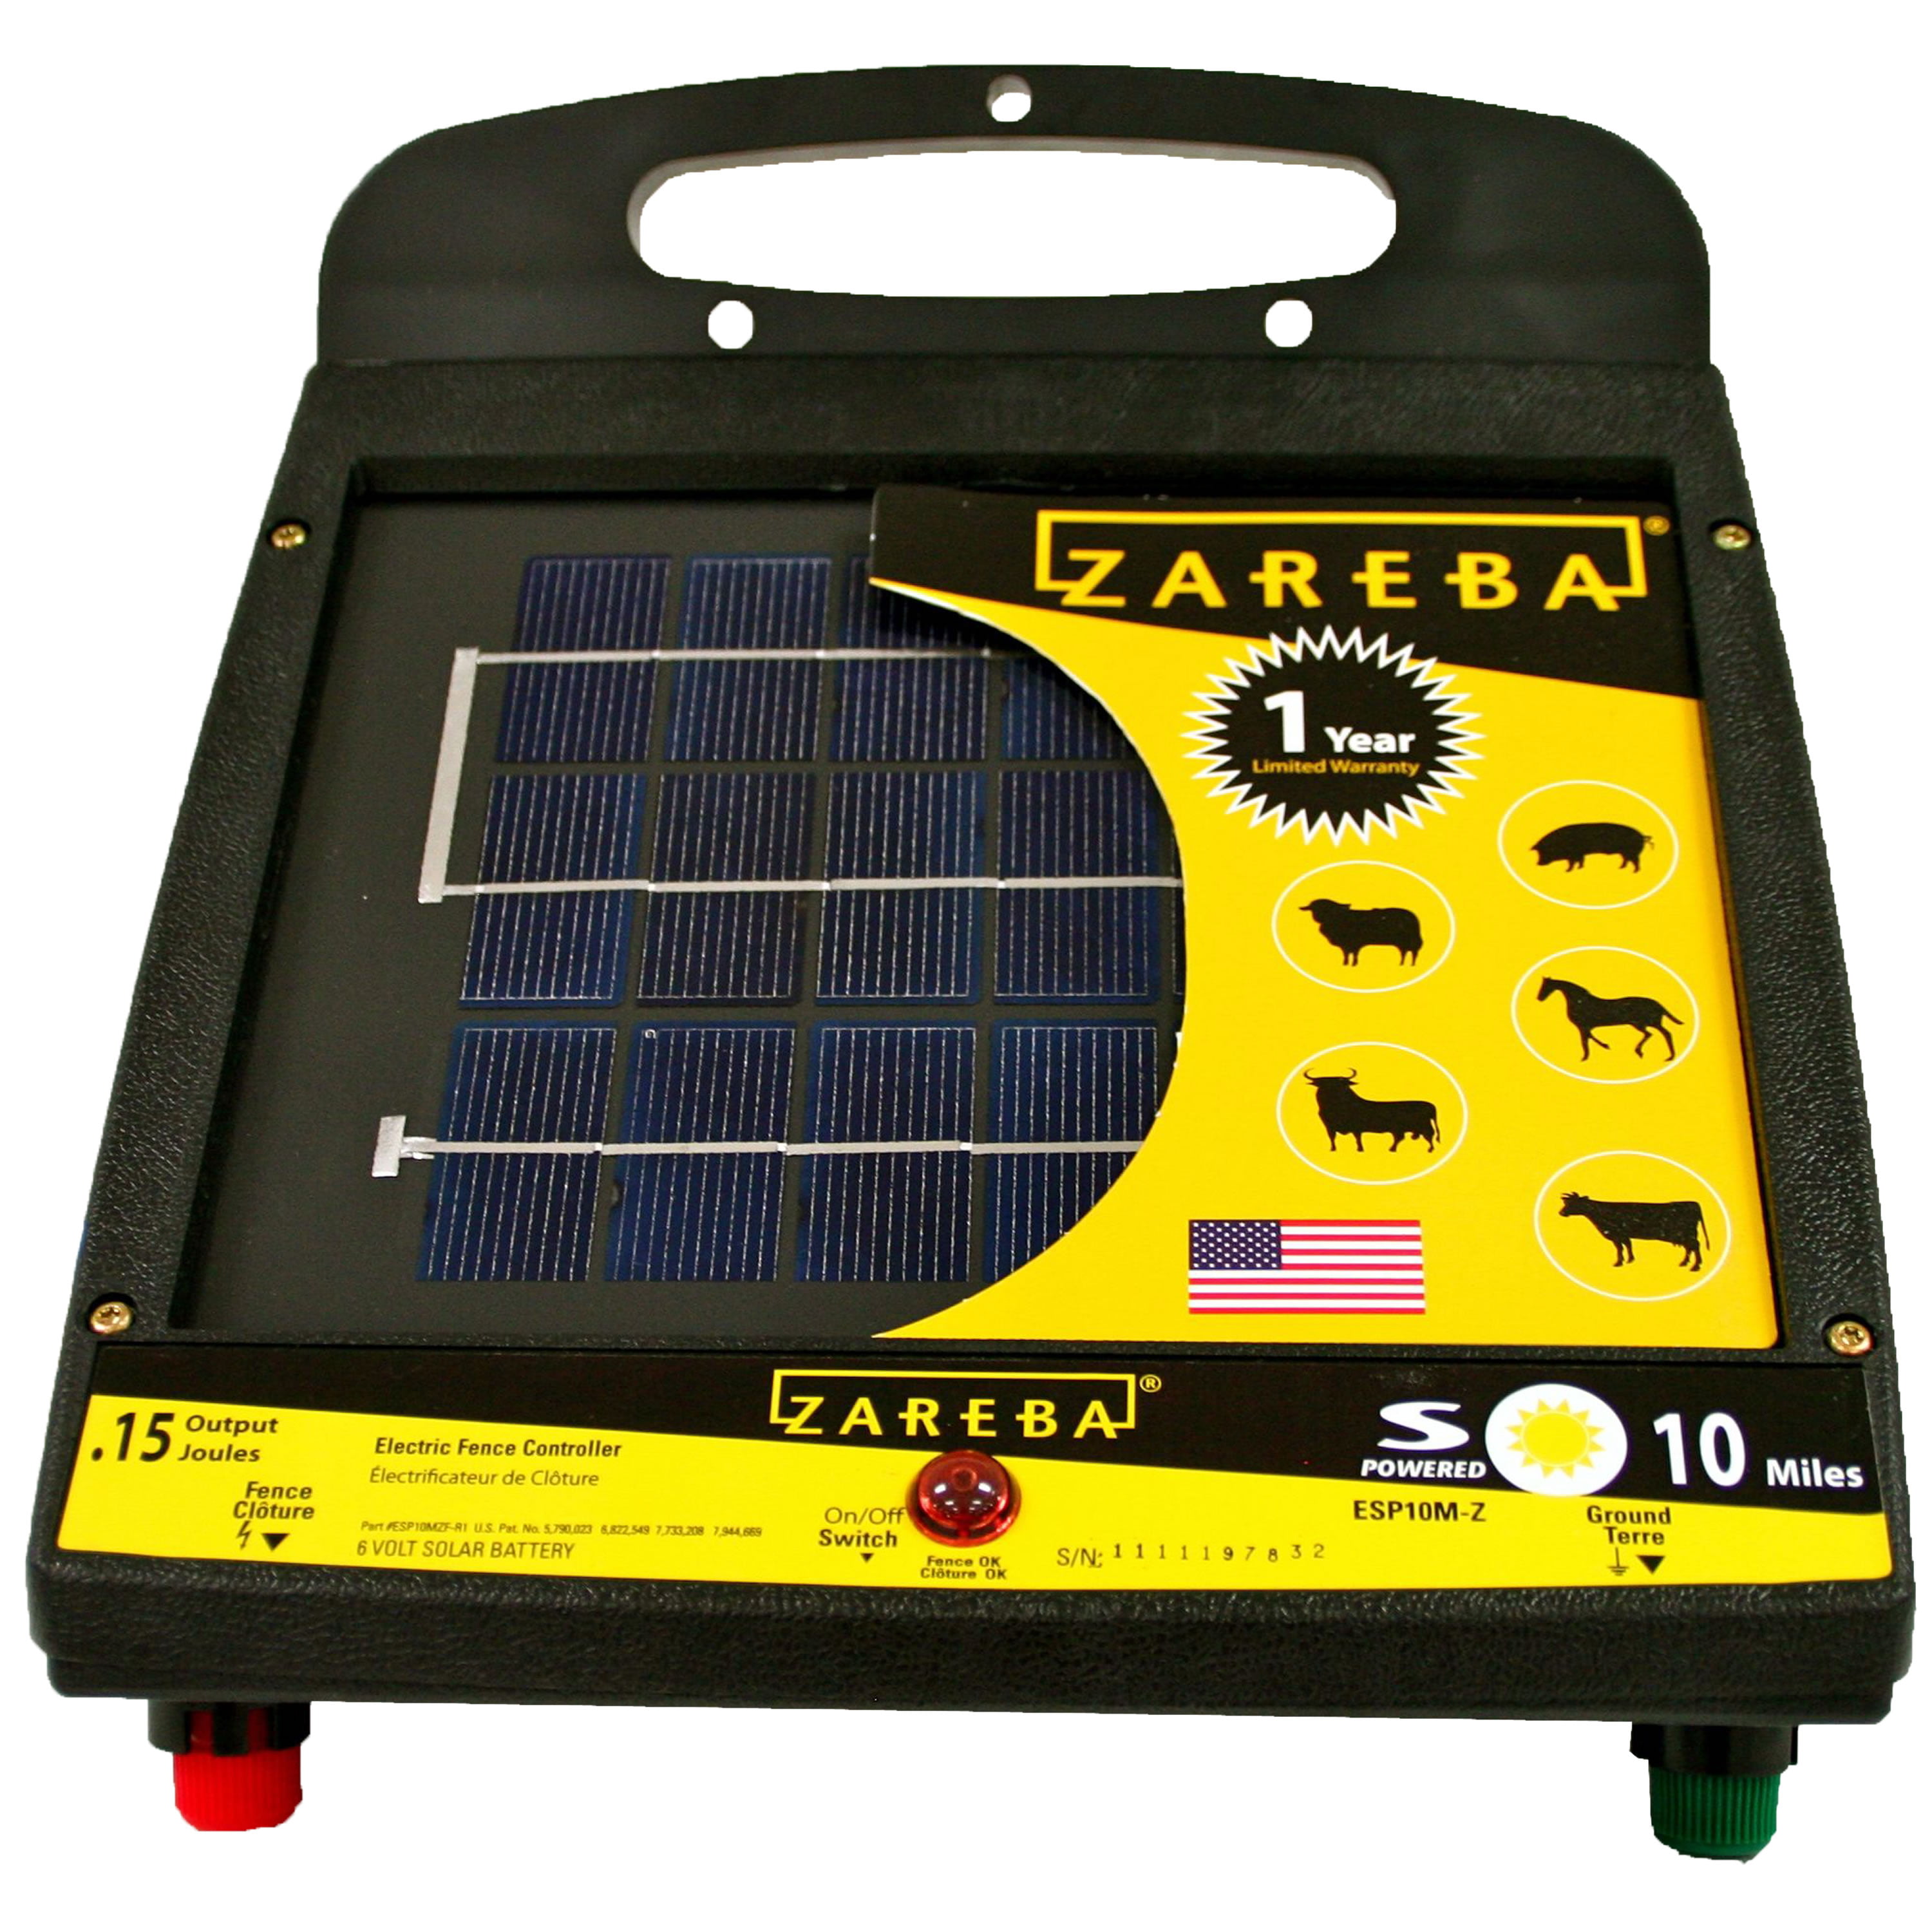 NEW Zareba Energizer ESP2M-Z 2-Mile Solar Powered Electric Fence Charger 6841308 